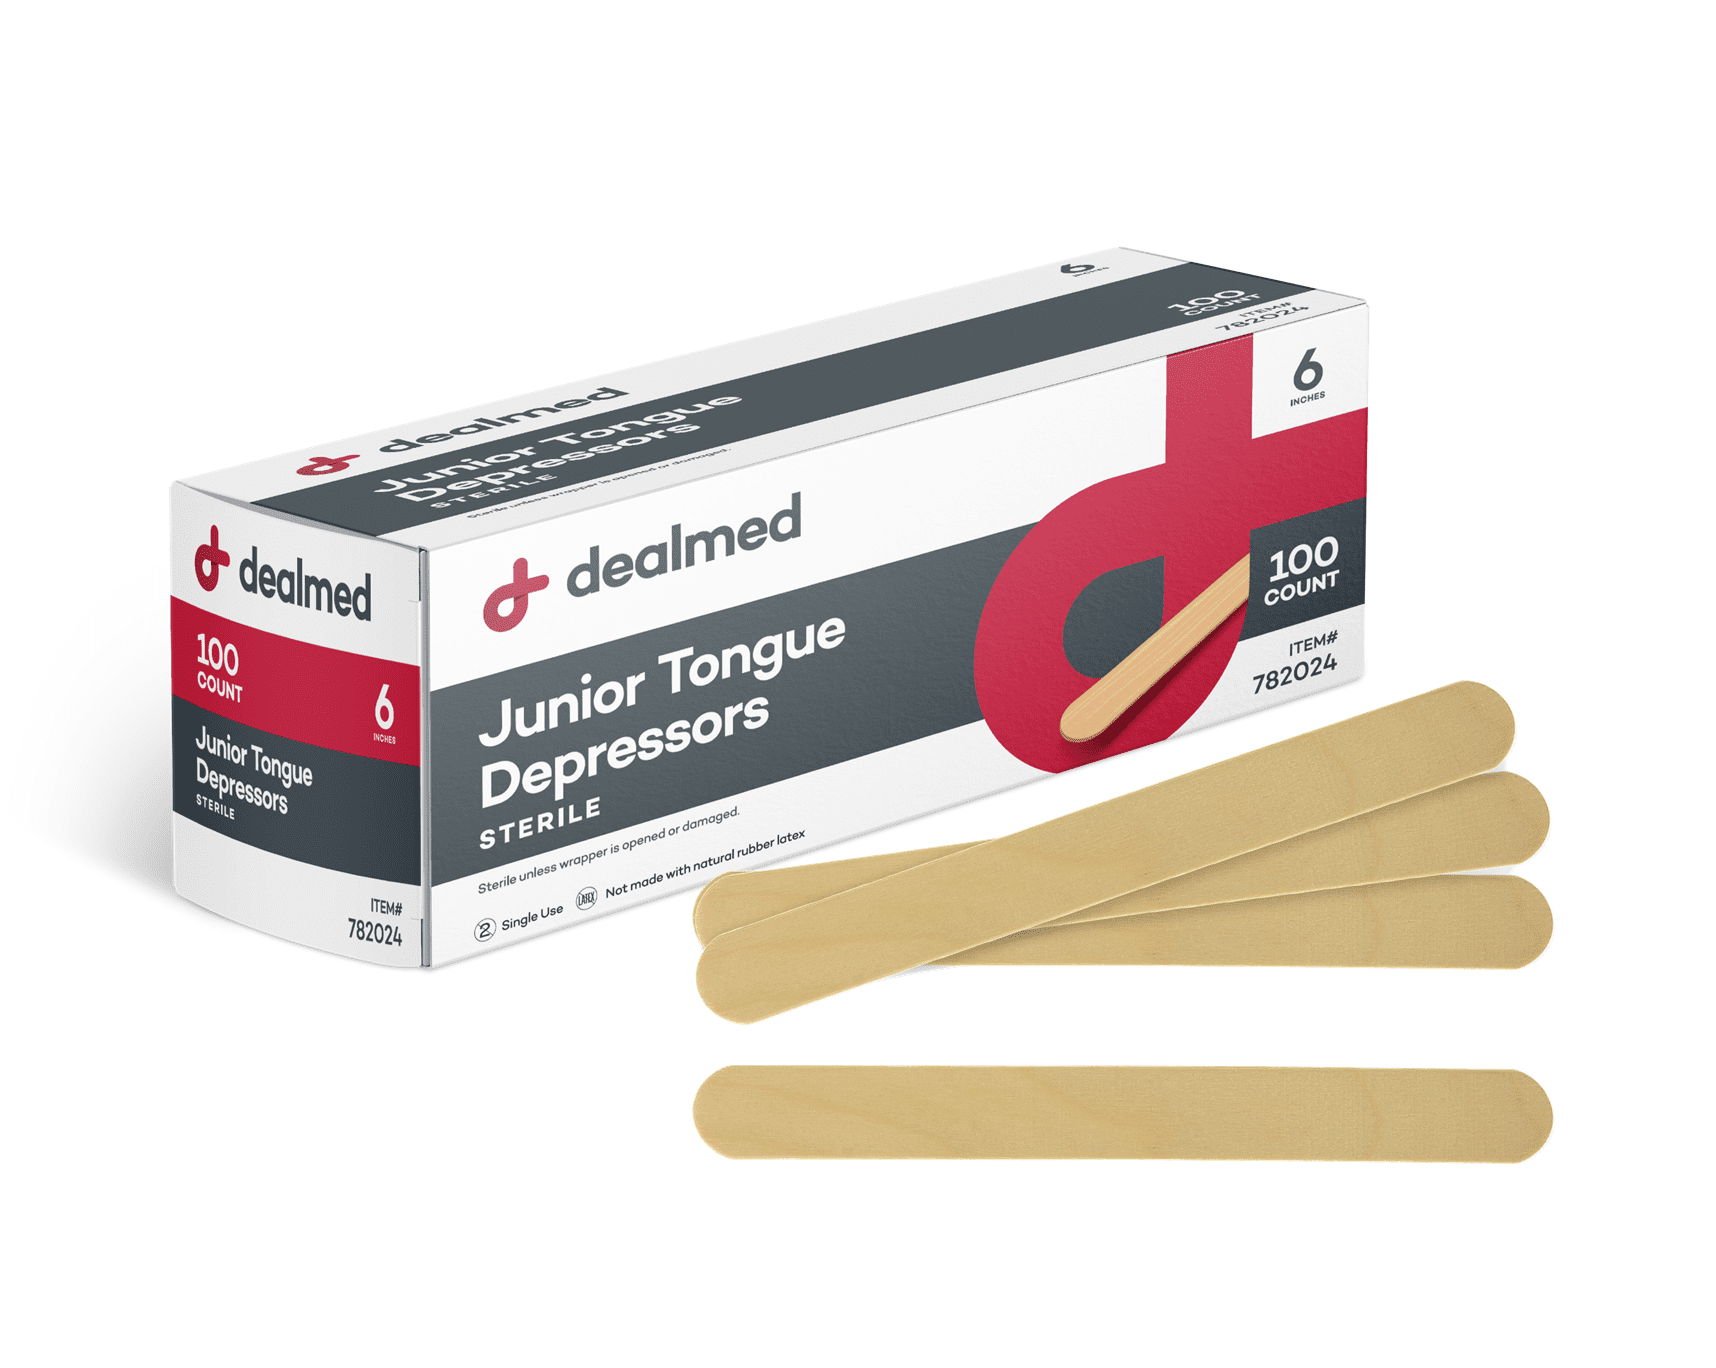 Dealmed 6 Senior Tongue Depressors - Sterile, Individually Wrapped for  Medical Practice, Crafts, Emergency First Aid Kits and More (100/Box)